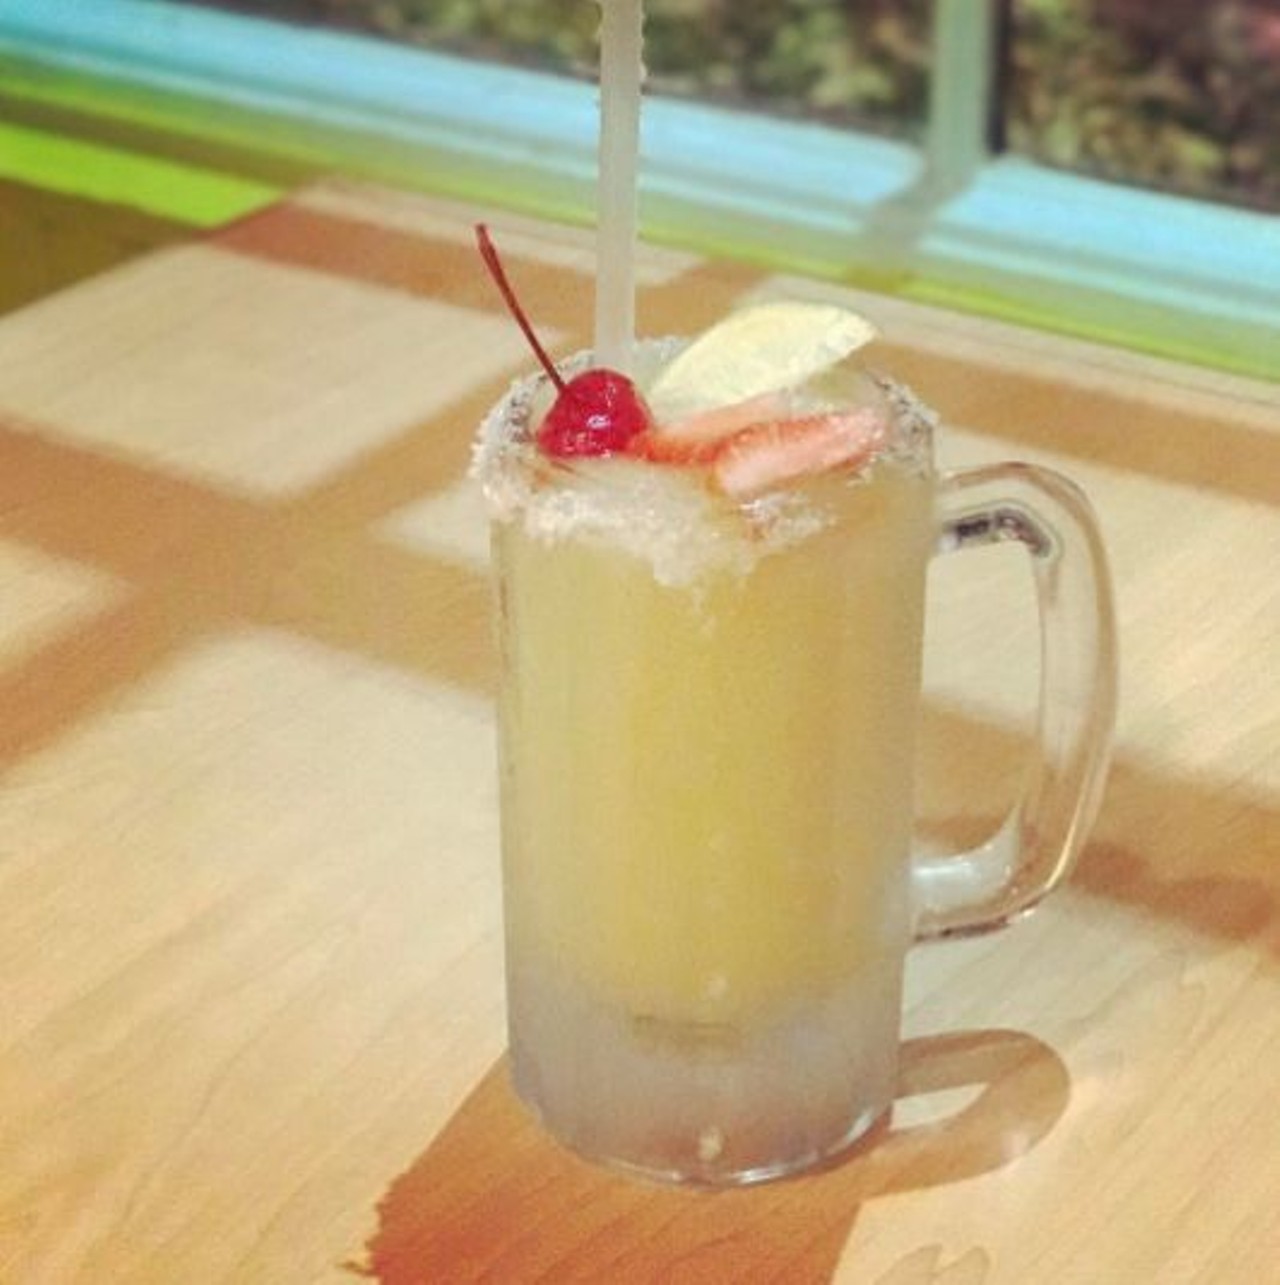 Mama Margie's
9950 Interstate 10 W, (210) 561-0400
You&#146;ll love Mama Margie&#146;s reliable and affordable margaritas. Do yourself a favor &#151; get there before 10 p.m. and order a $4 top shelf margarita.
Photo via Instagram, chrisoviedo